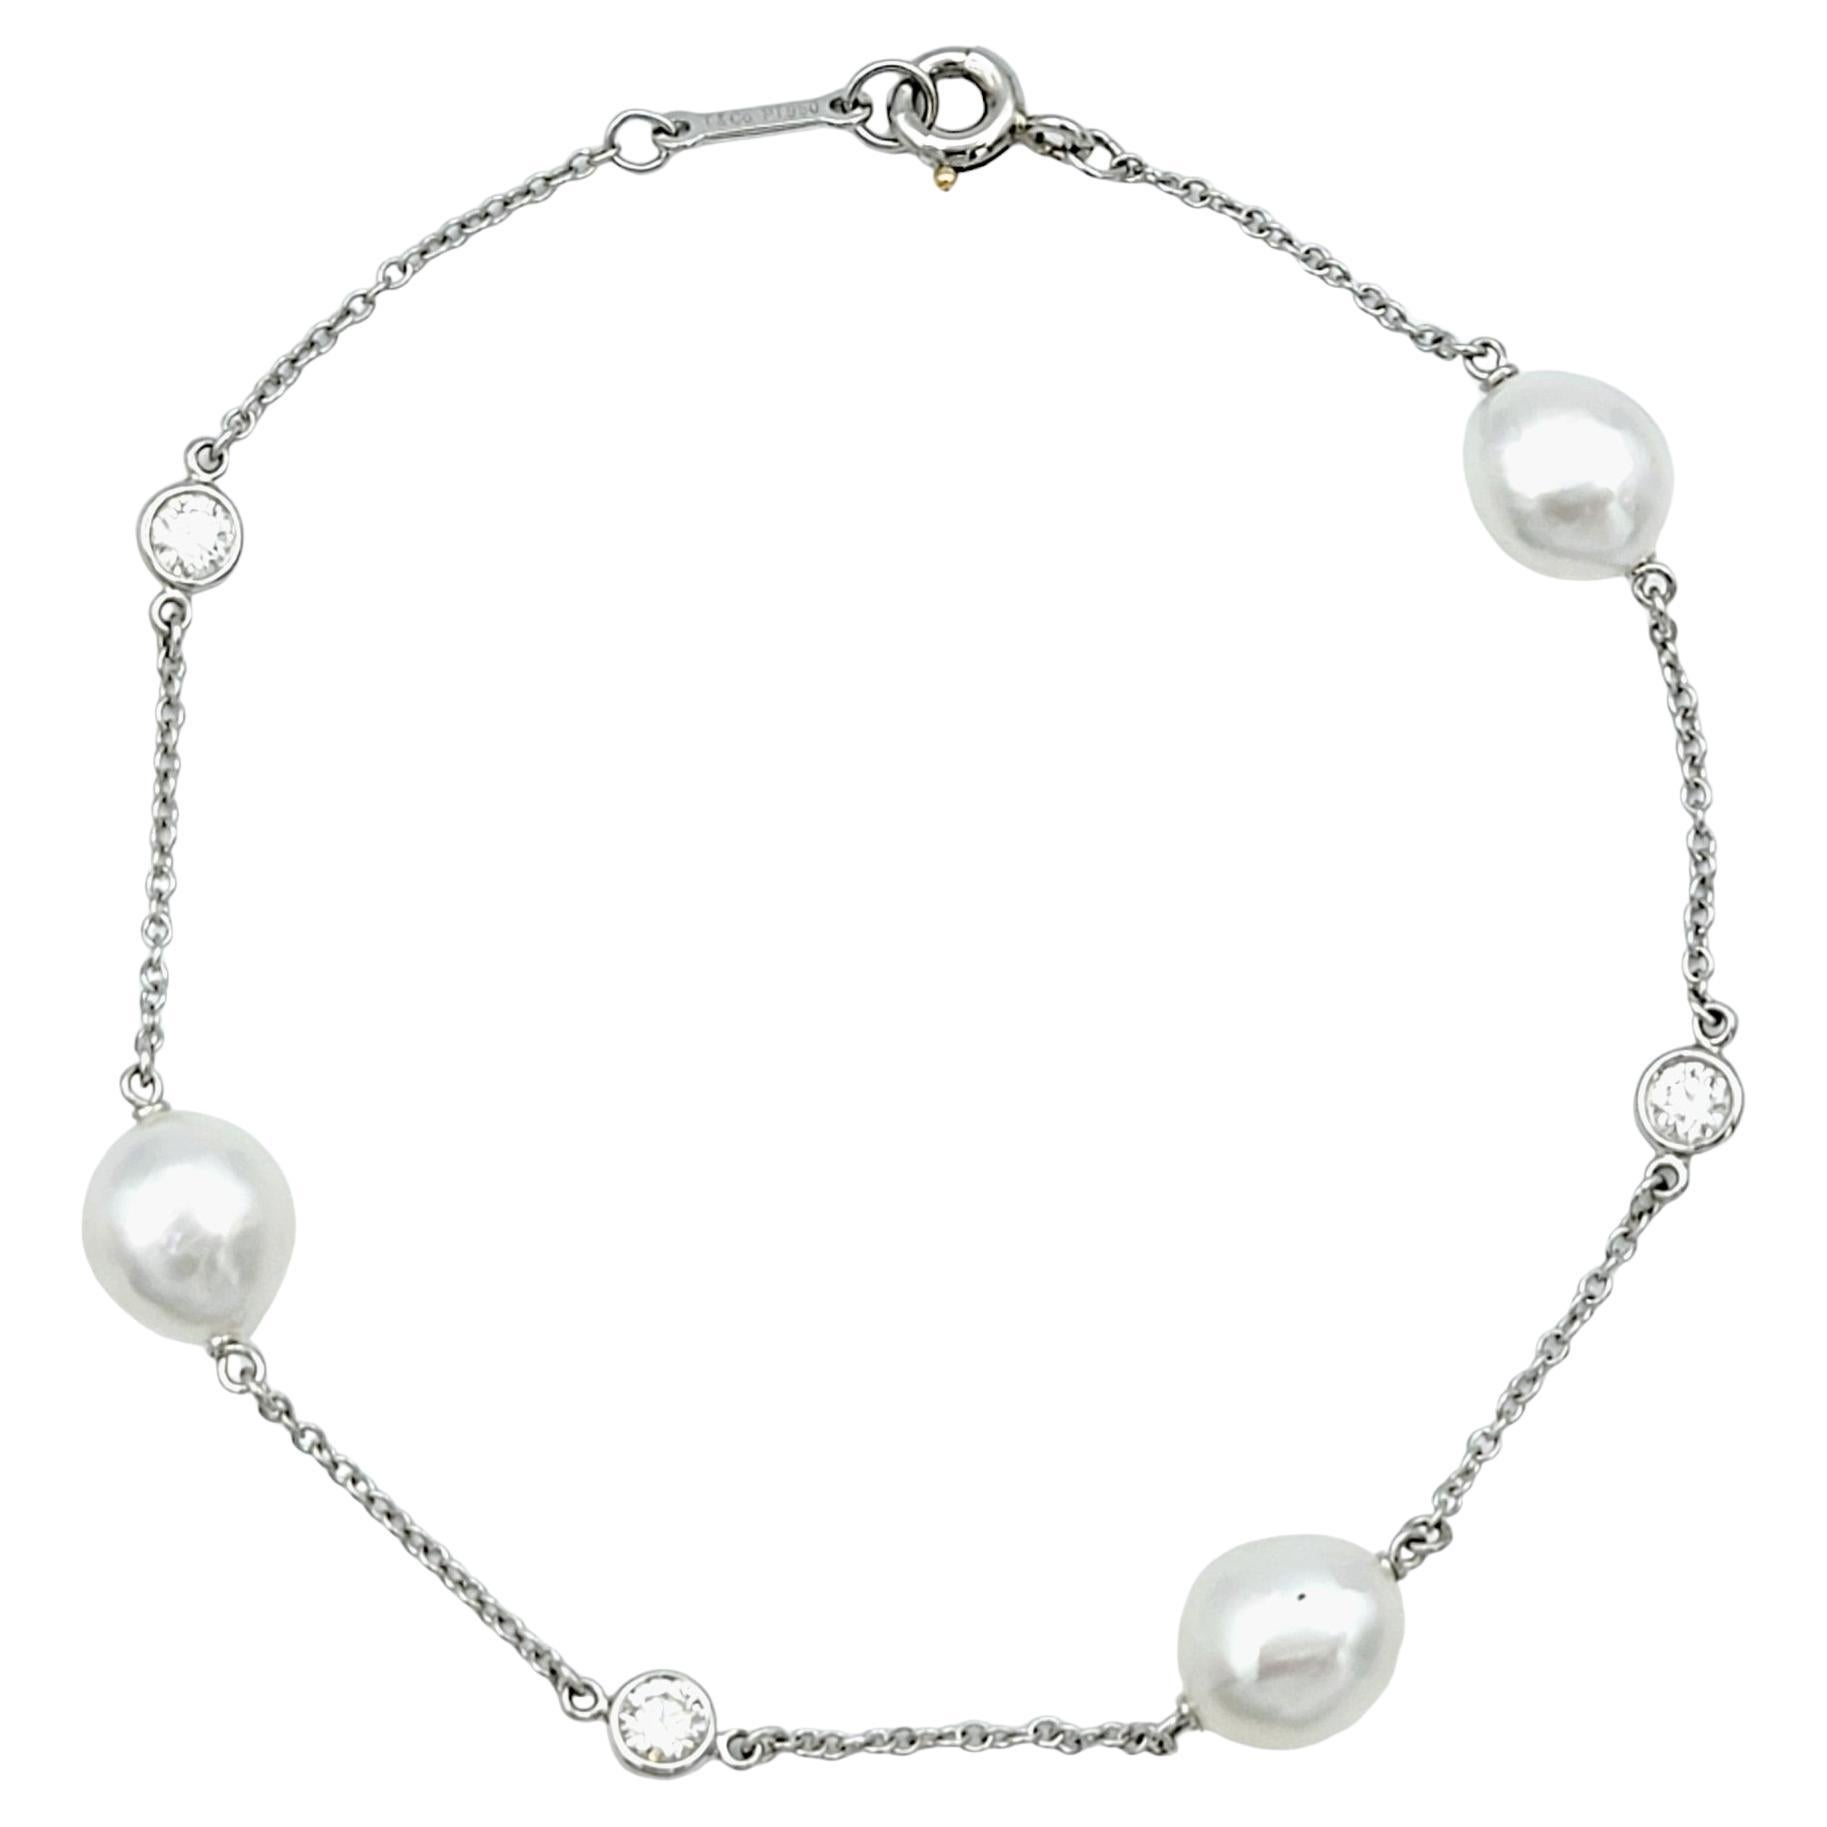 Tiffany & Co. Elsa Peretti Diamonds by the Yard Chain Bracelet with Keshi Pearls For Sale